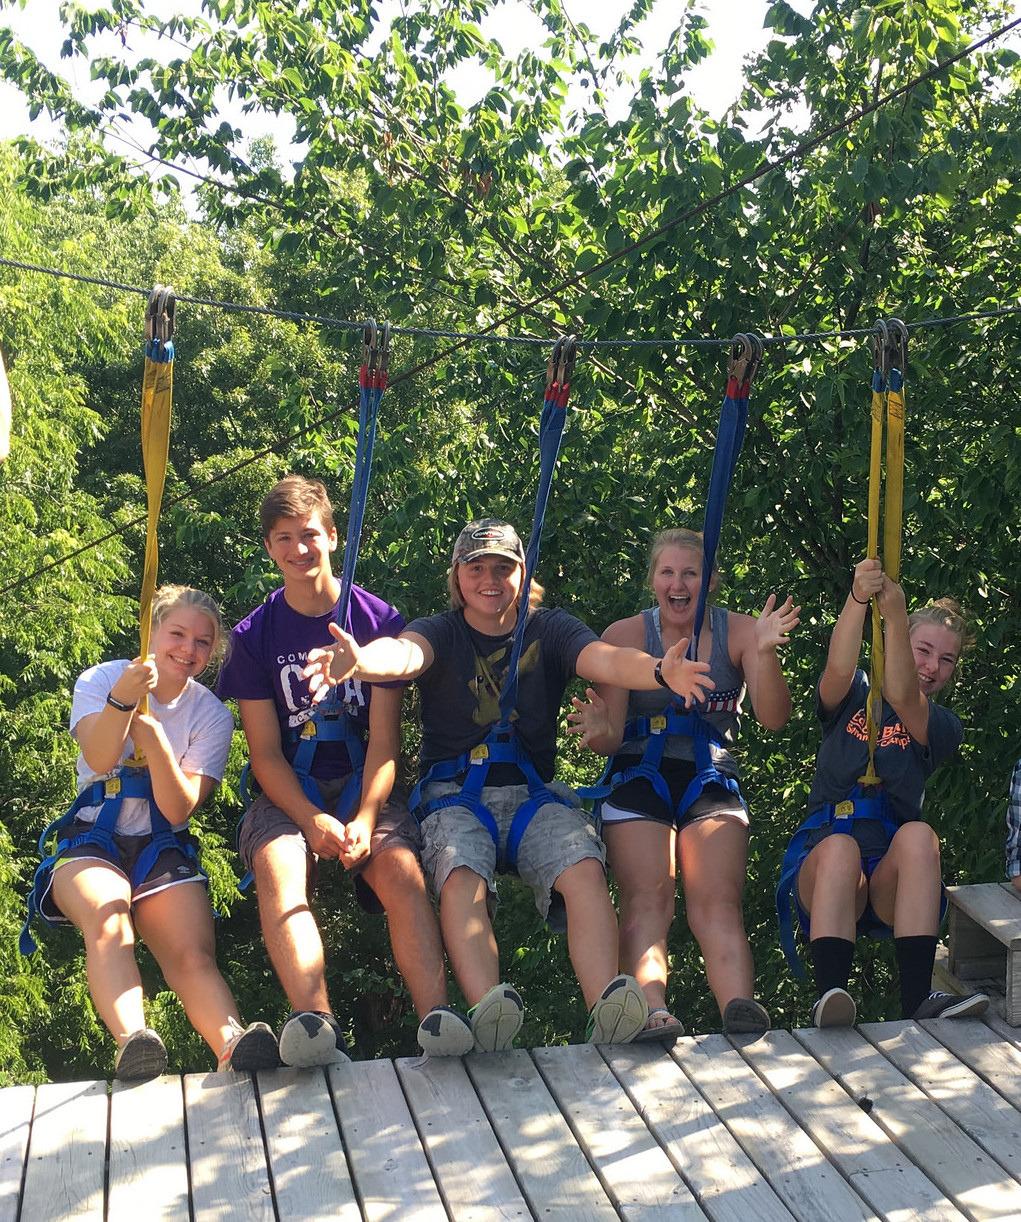 Rocks, Ropes, & Rivers 2 Page 1 Quick Reference Guide Camp Check-in: July 22nd > 2:30-3:00 pm *Parent Meeting at 3:00 pm Camp Check-out: June 29th >